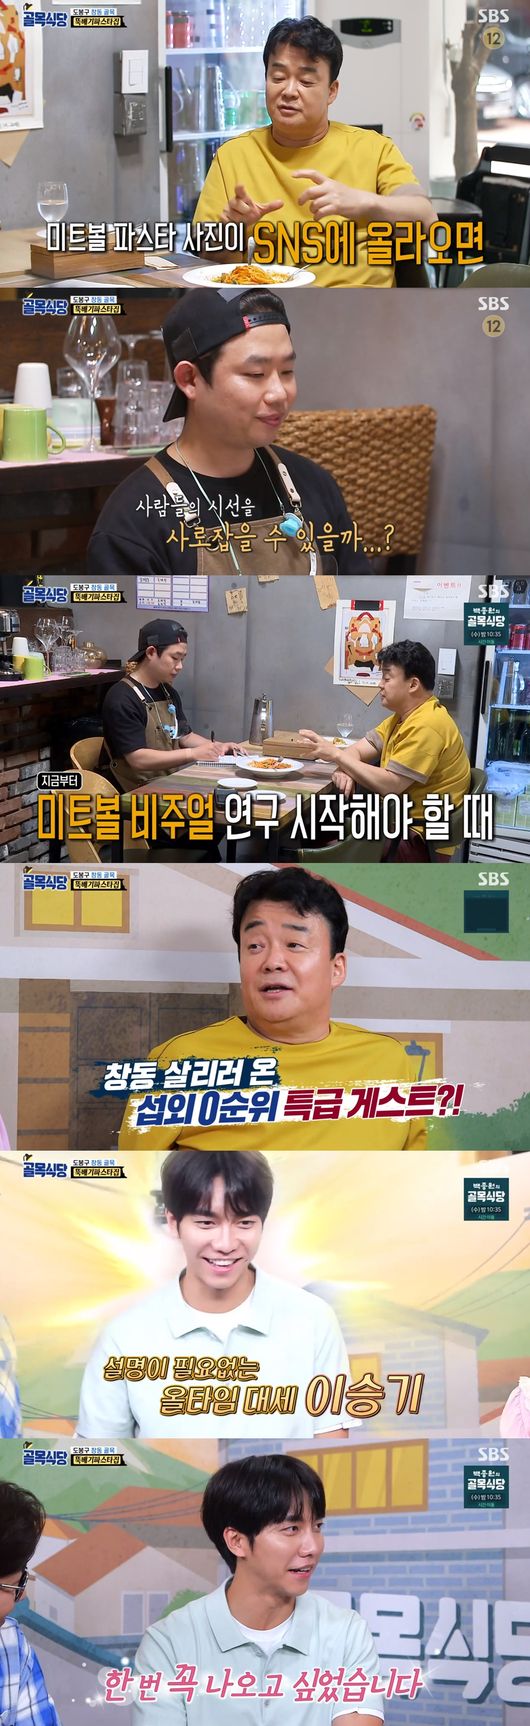 Lee Seung-gi reveals affection for Baek Jong-wonLee Seung-gi, a Chang-dong native, appeared on SBS Baek Jong-wons The Alley Restaurant broadcast on the 19th and started a Pasta house tasting.Earlier in the day, Fabry went to the pizza house and found a Pasta house to improve meatballs. Fabry advised, We should put pigs and small meat in half.He then advised that when making arancini, only flour dough and bread flour can be buried to make it more crispy.After being advised by Fabry, the boss of Pasta House repeatedly practiced. The boss told Baek Jong-won, I tried meatball cream and tomatoes.Arachini also practiced in two ways, Baek Jong-won said, tasting meatball tomato Pasta and Arachini Cream Pasta.It tastes good; it definitely fits well with Cream sauce, said Baek Jong-won, who tasted Arachini.The meatball has definitely been tasty, Baek Jong-won said.But Baek Jong-won said, I like meatball Pasta, he said. I think its a completion, but I think its a completion.Baek Jong-won said there was no visual that could attract peoples attention.The taste is important, but now it should be uploaded to SNS, said Baek Jong-won. The taste of sauce is completed. I think we should study meatballs.On that day, Baek Jong-won said he had invited a guest; Baek Jong-won said, I am a very difficult person to get out of, but I came out to save the neighborhood.It was Lee Seung-gi, who said, I had to come in a little bit, but I came out too soon, I wanted to come once.Kim Seong-ju said, If you do not know Lee Seung-gi in Dobong-gu, you are a spy.Lee Seung-gi said, I lived in Suyuri, went to elementary school in Banghak-dong, and lived in Chang-dong until I debuted. I thought about it when I walked here.Lee Seung-gi then said, I admired Mr. Baek Jong-won so much that I wanted to be invited to the house once.I said that the two-way type would connect in the middle, but it was canceled. I thought back in the day when I said I was filming in Chang-dong, its the way I rode my bike, Lee Seung-gi said.We have to go to two places today - Pasta and chicken gangsters, said Baek Jong-won.Lee Seung-gi heard about Arrancini and laughed, saying, I made it for children in Little Forest and I hated it.On the other hand, Lee Seung-gi visited Pastas house and sampled Mitball Pasta and Arrancini Pasta.Lee Seung-gi said, I always talk about the problem, he said.: SBS Baek Jong-wons The Alley Restaurant broadcast capture